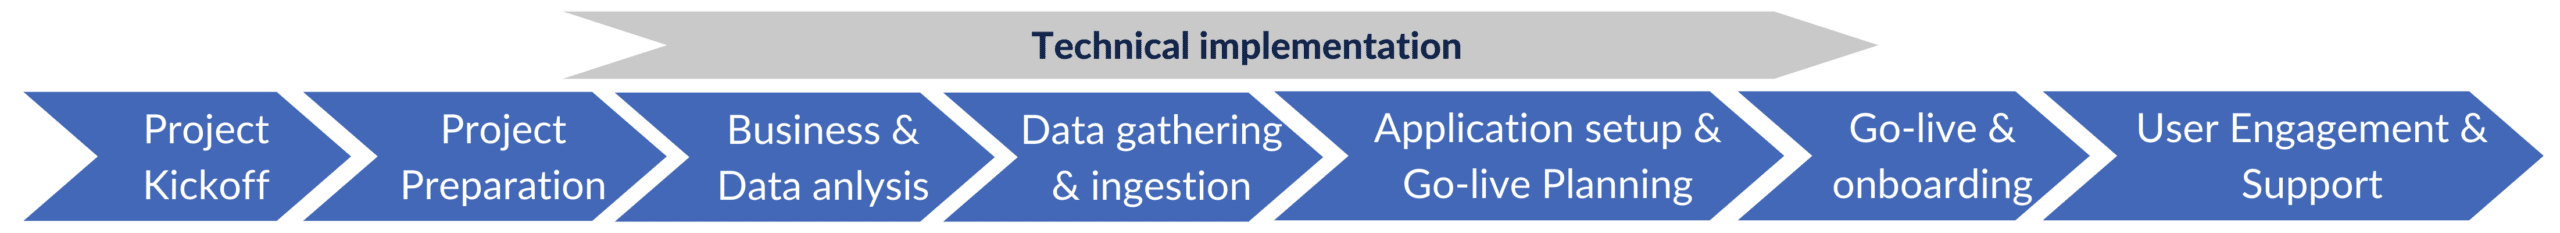 Technical implementation